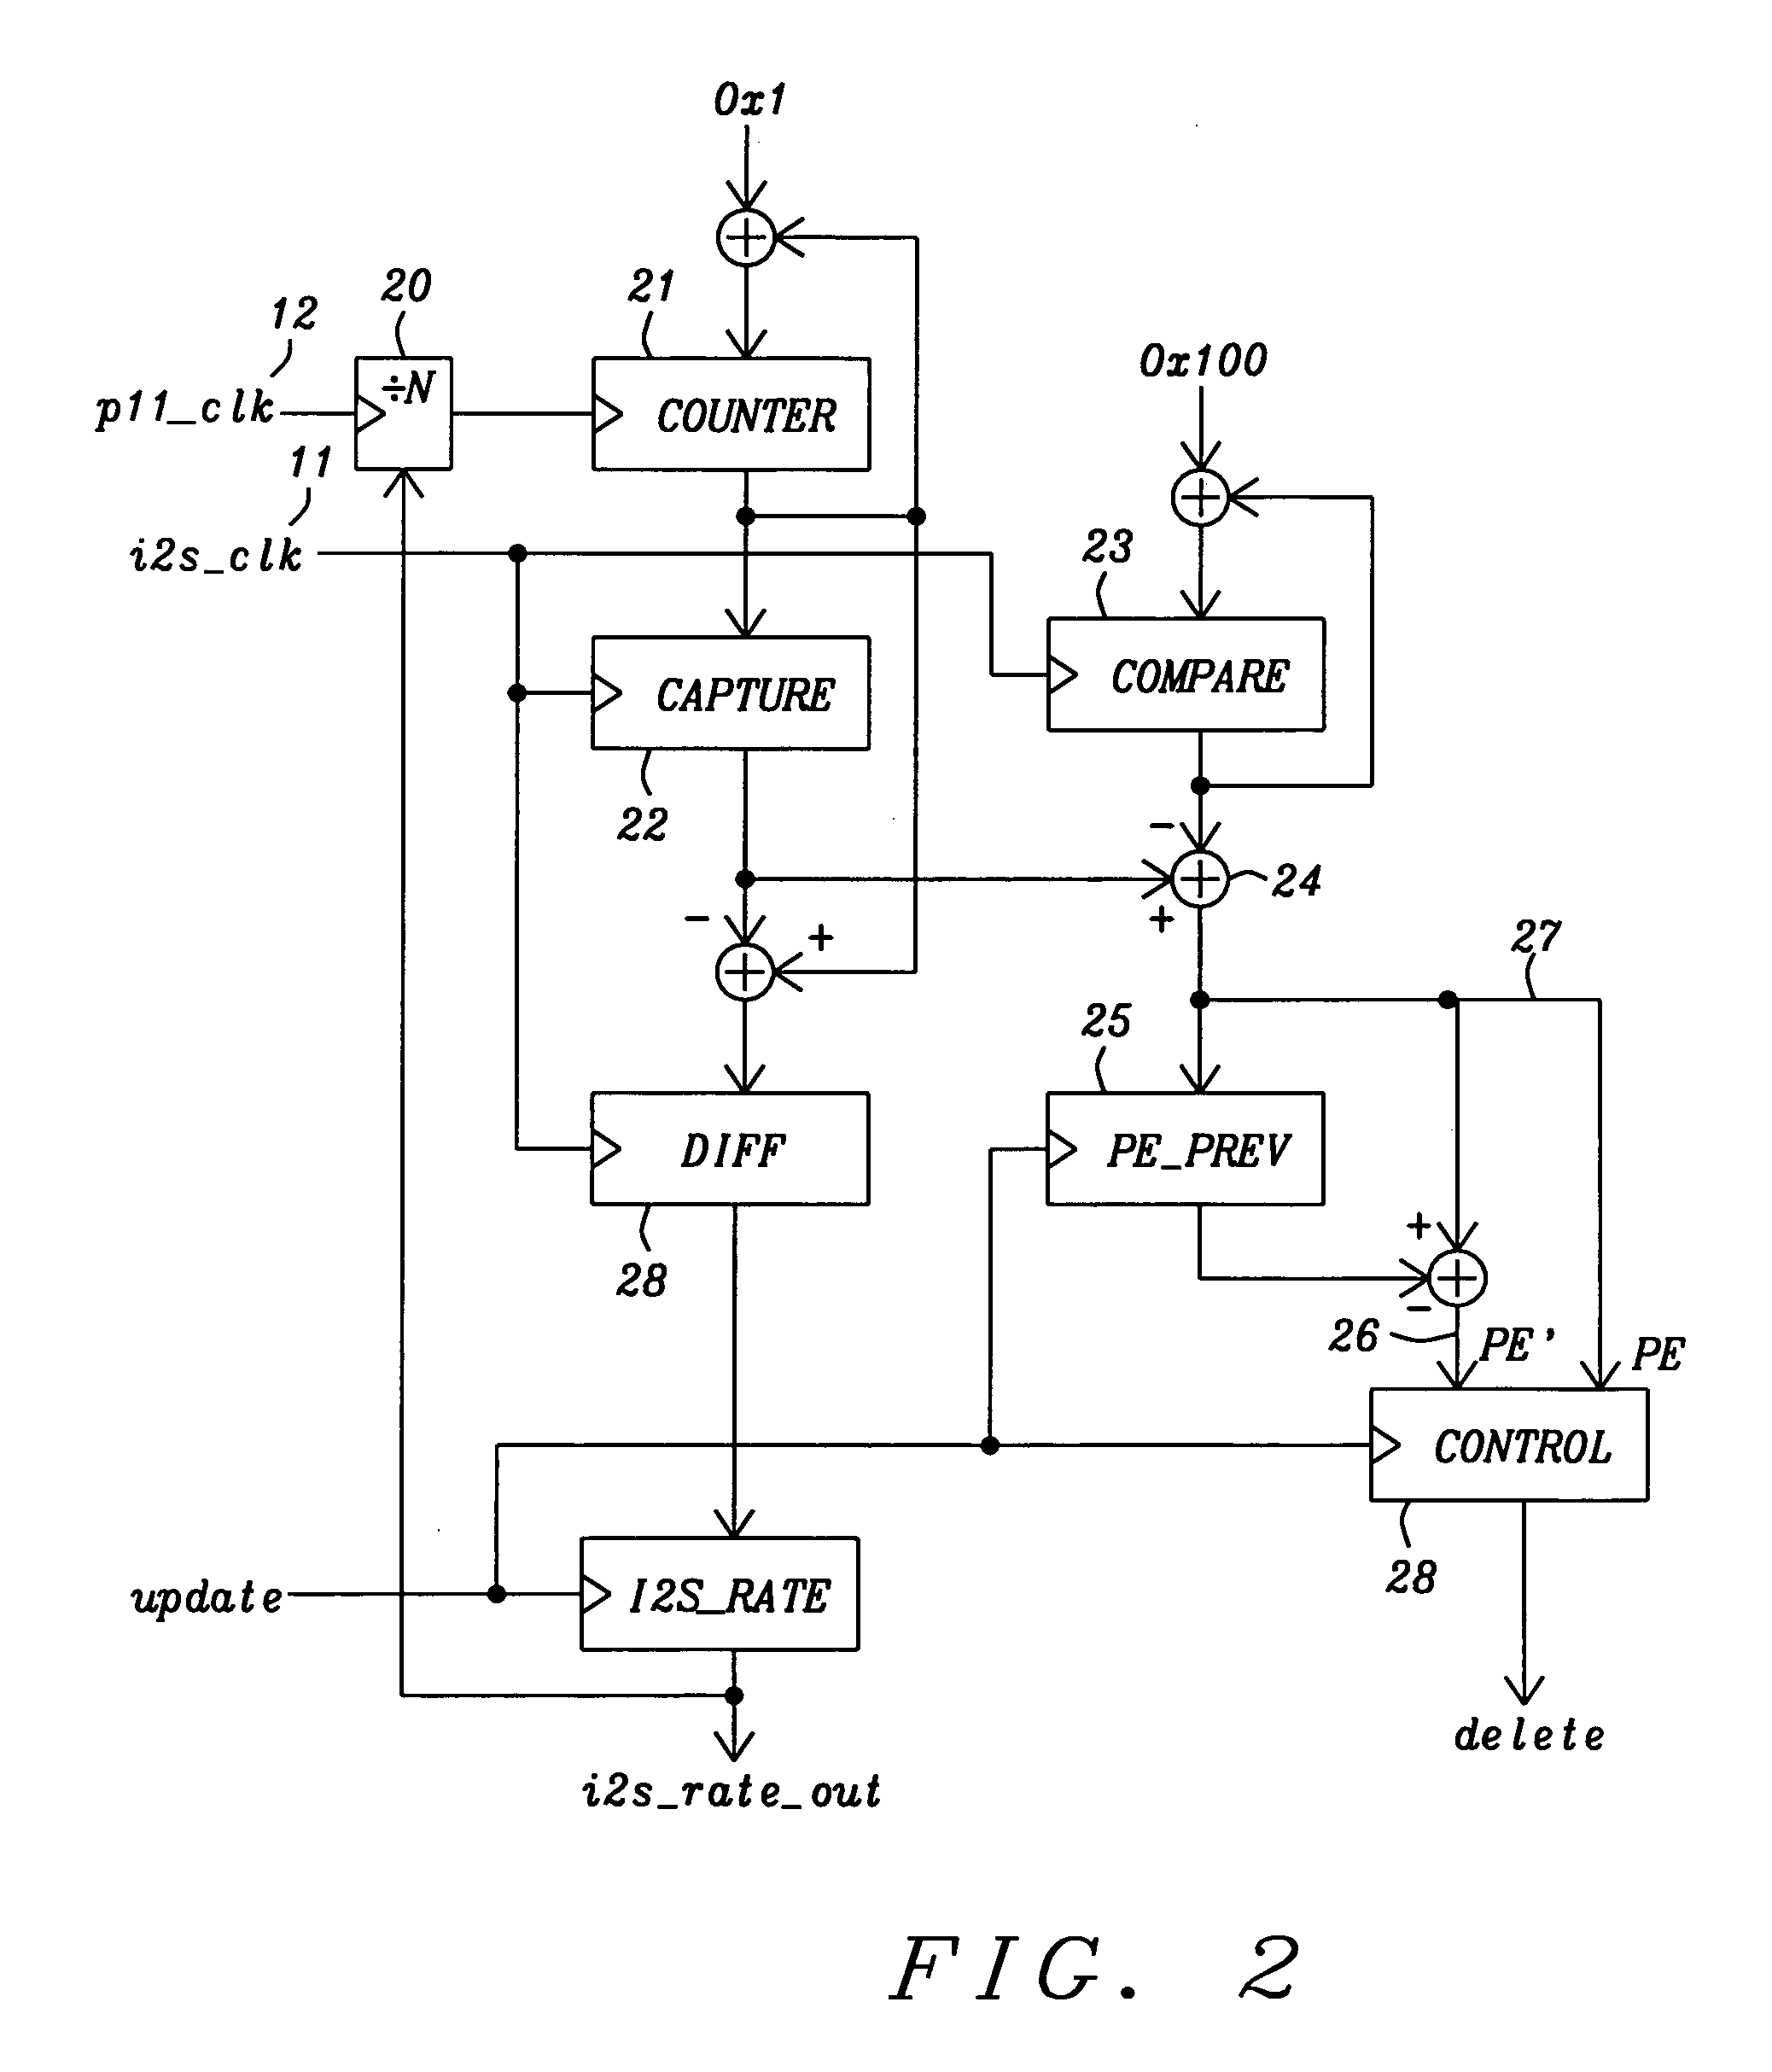 Digital controller for automatic rate detection and tracking of audio interface clocks